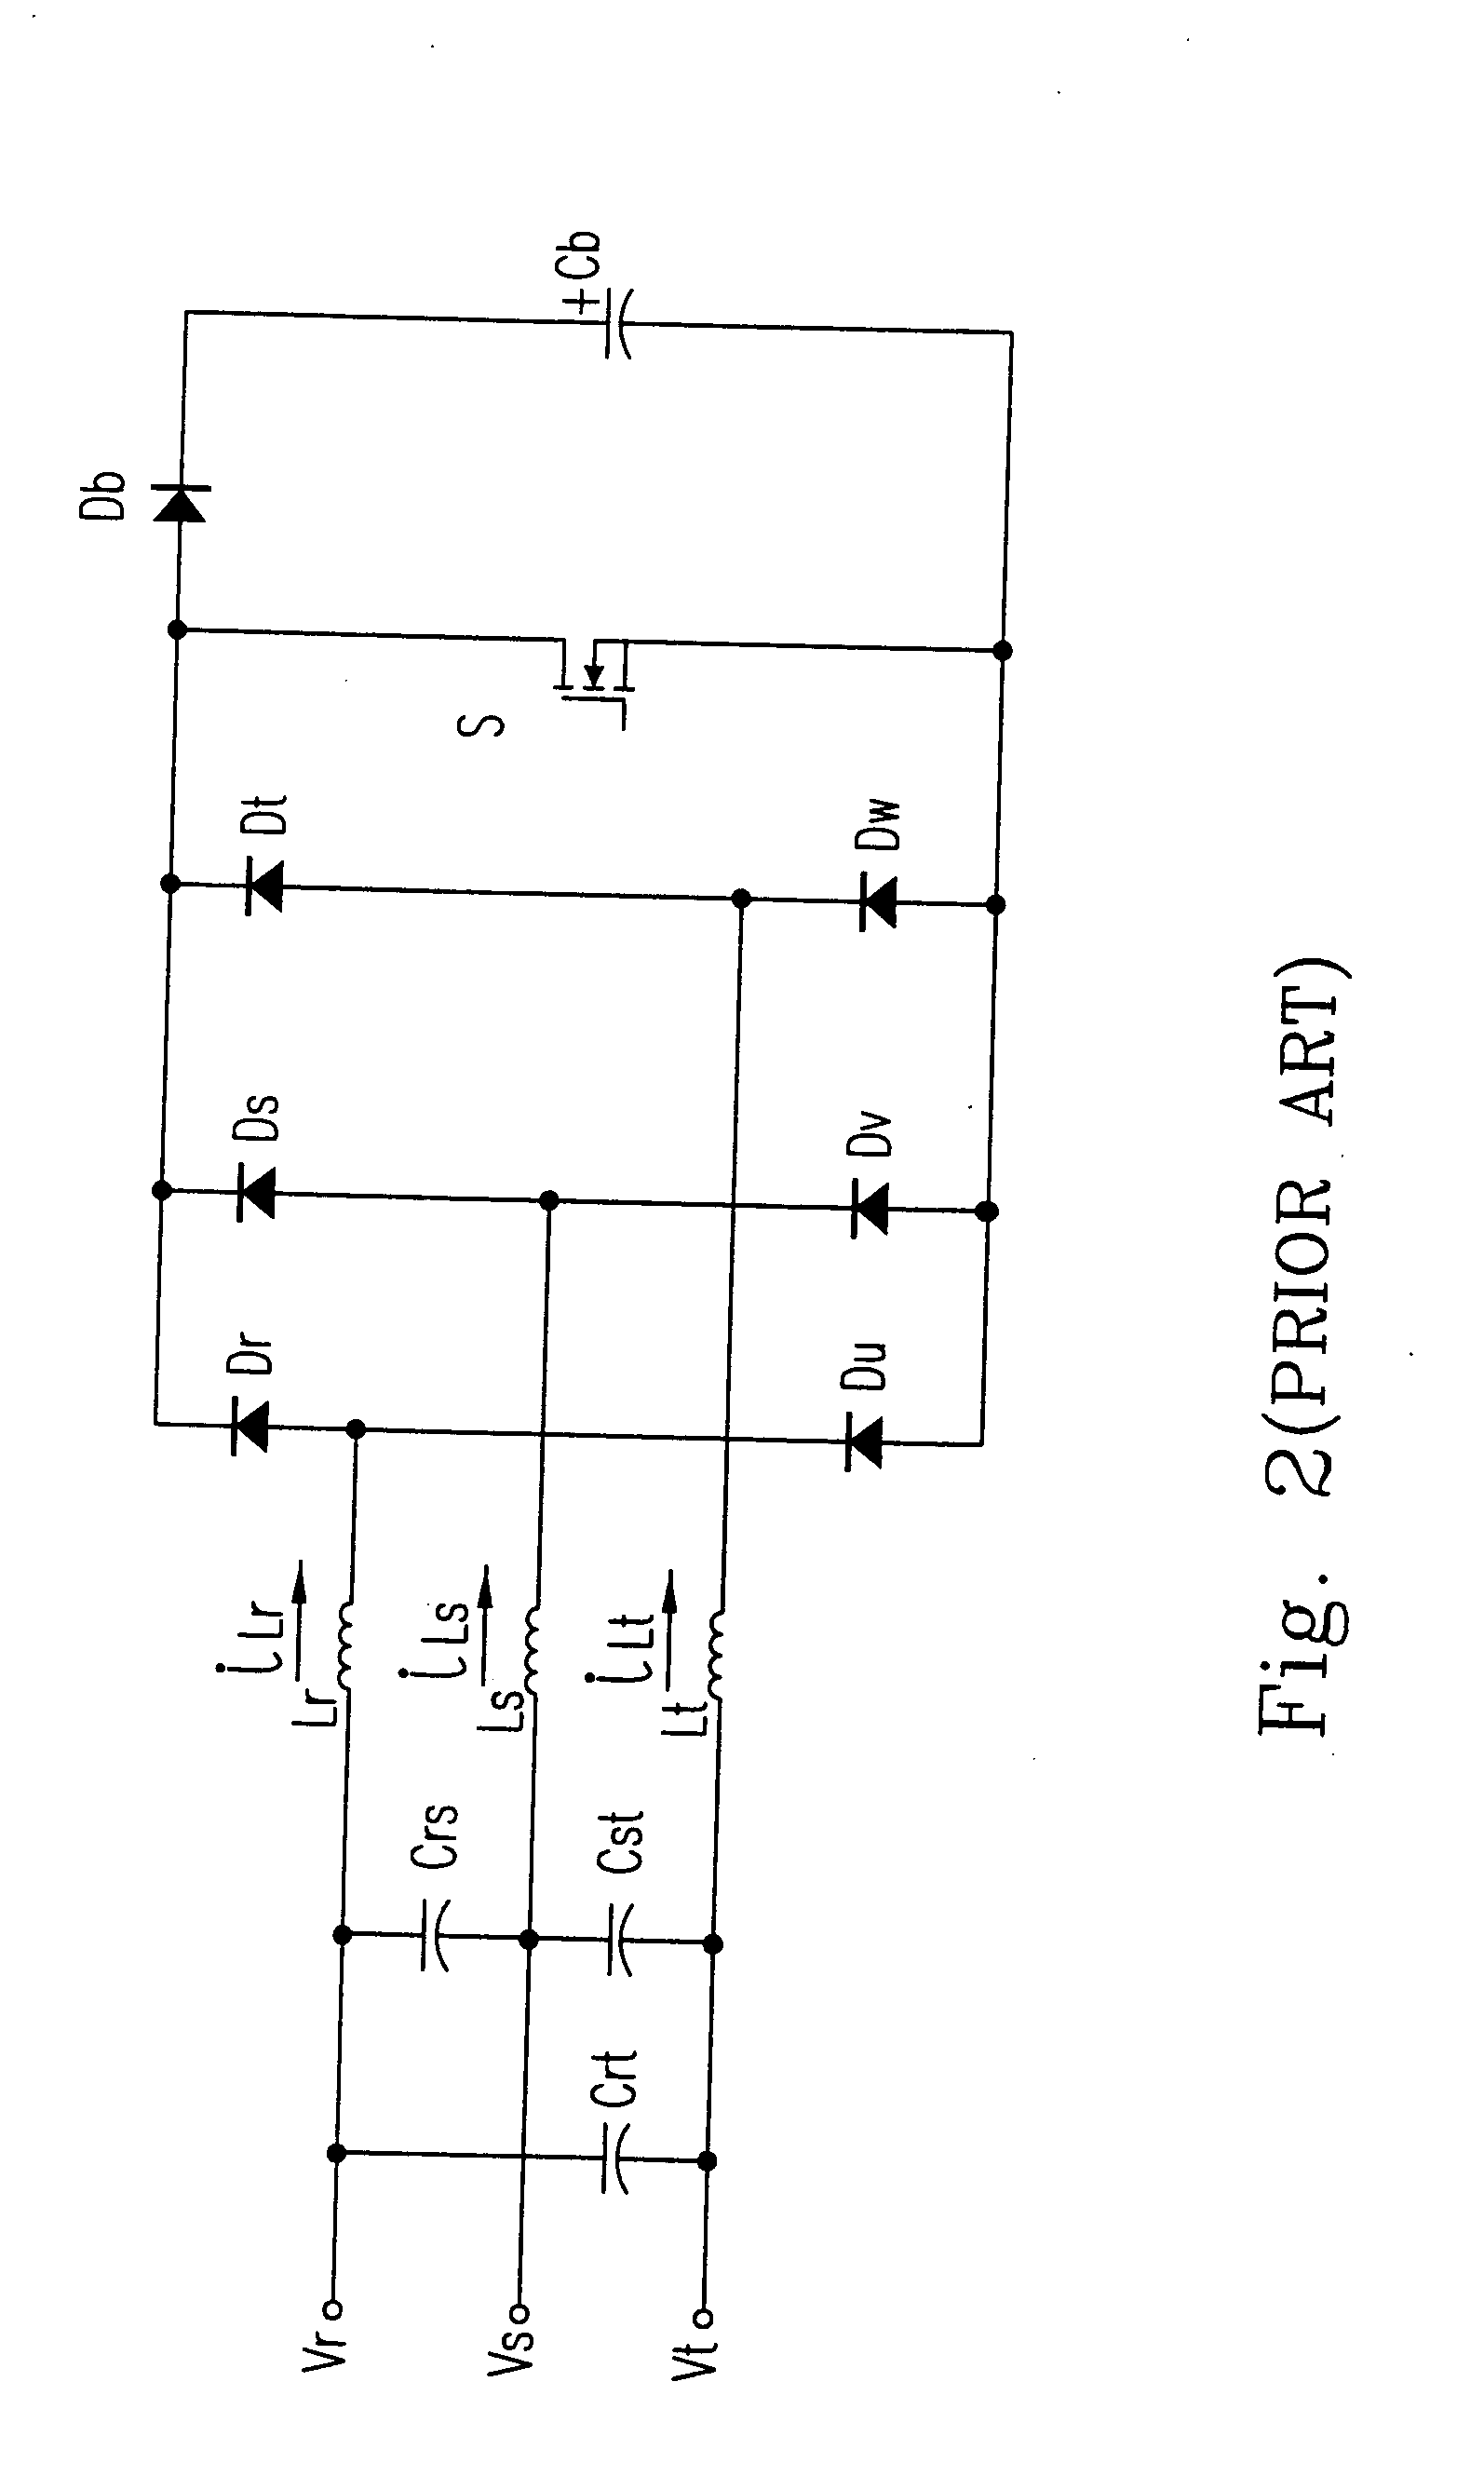 Soft-switching three-phase power factor correction converter